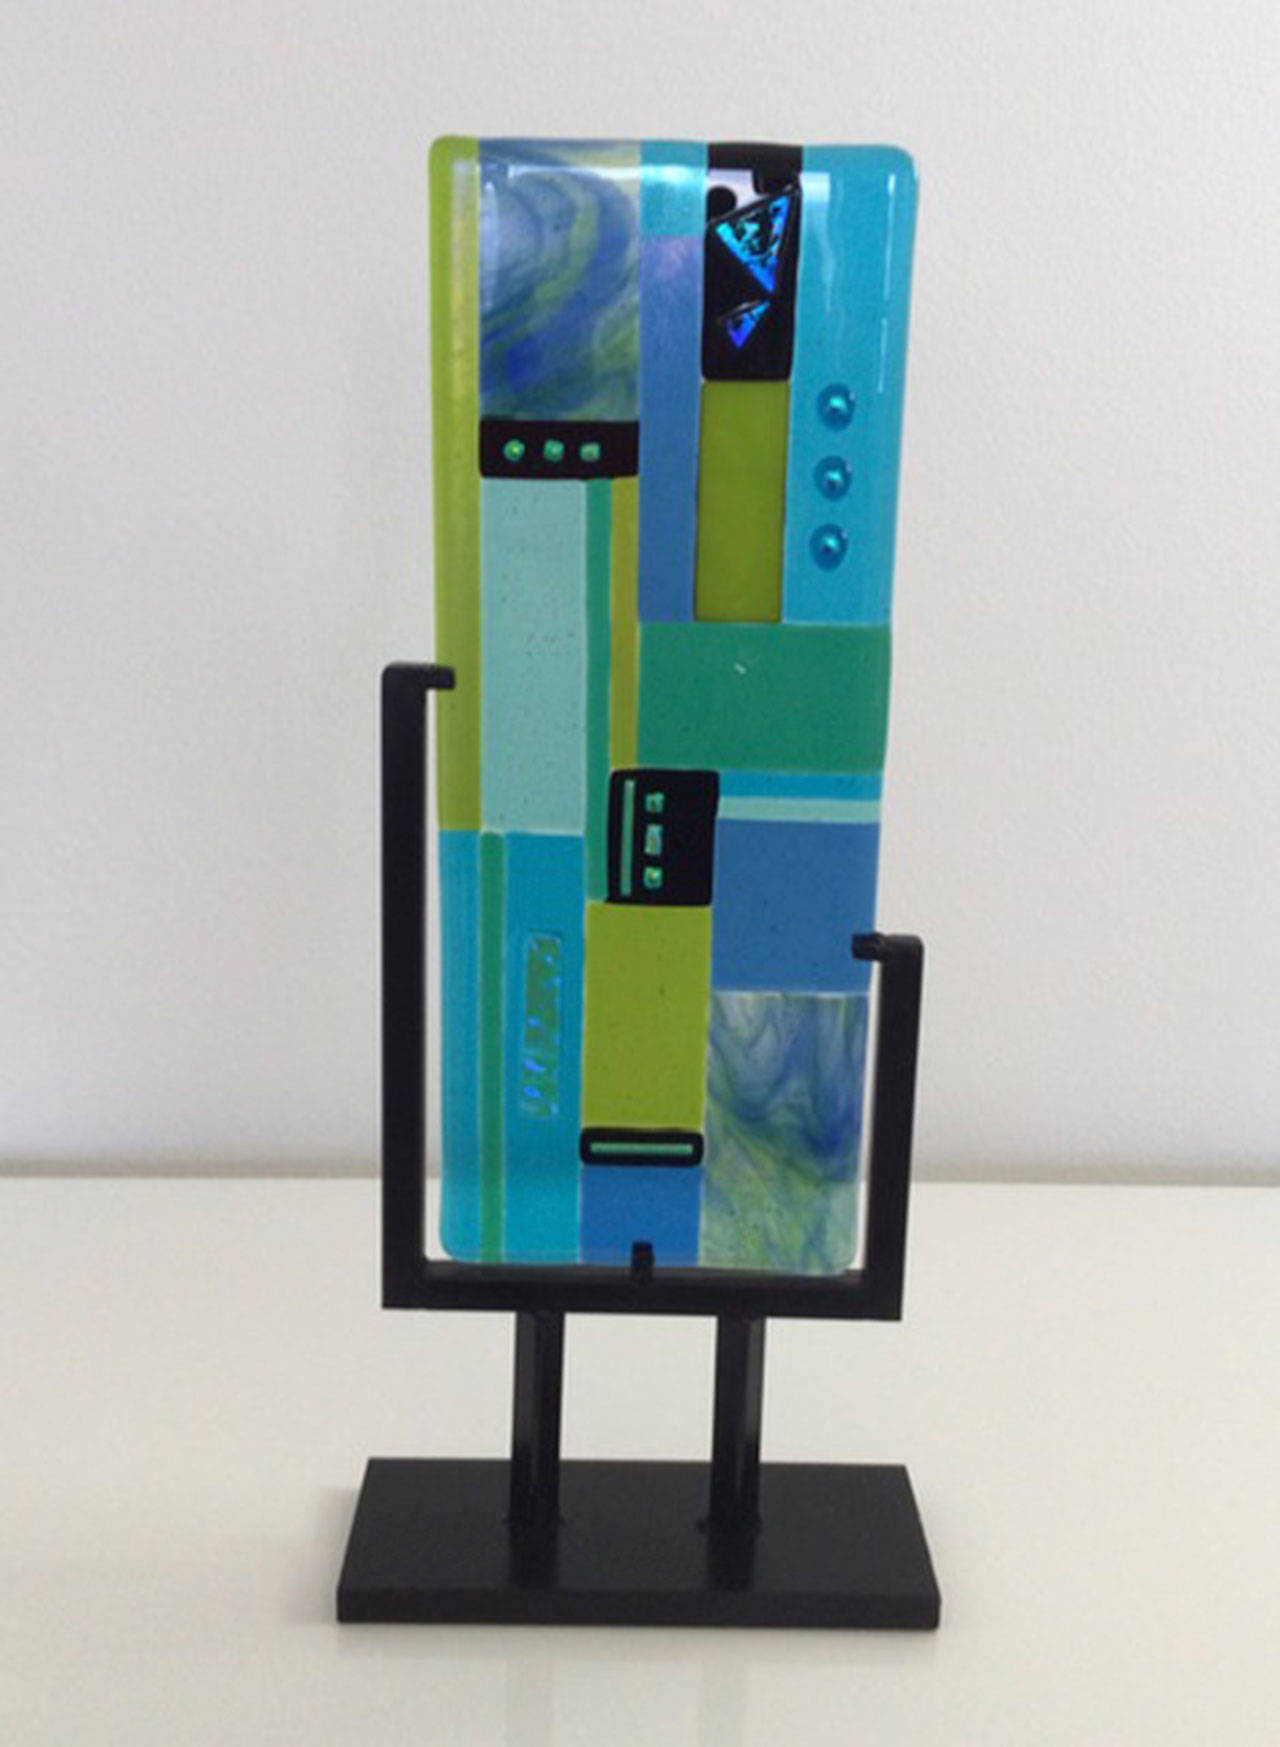 Fused glass art by Lizabeth Harper, one of 11 artists featured at the 2021 ARTfusion event set for Labor Day Weekend in Sequim.